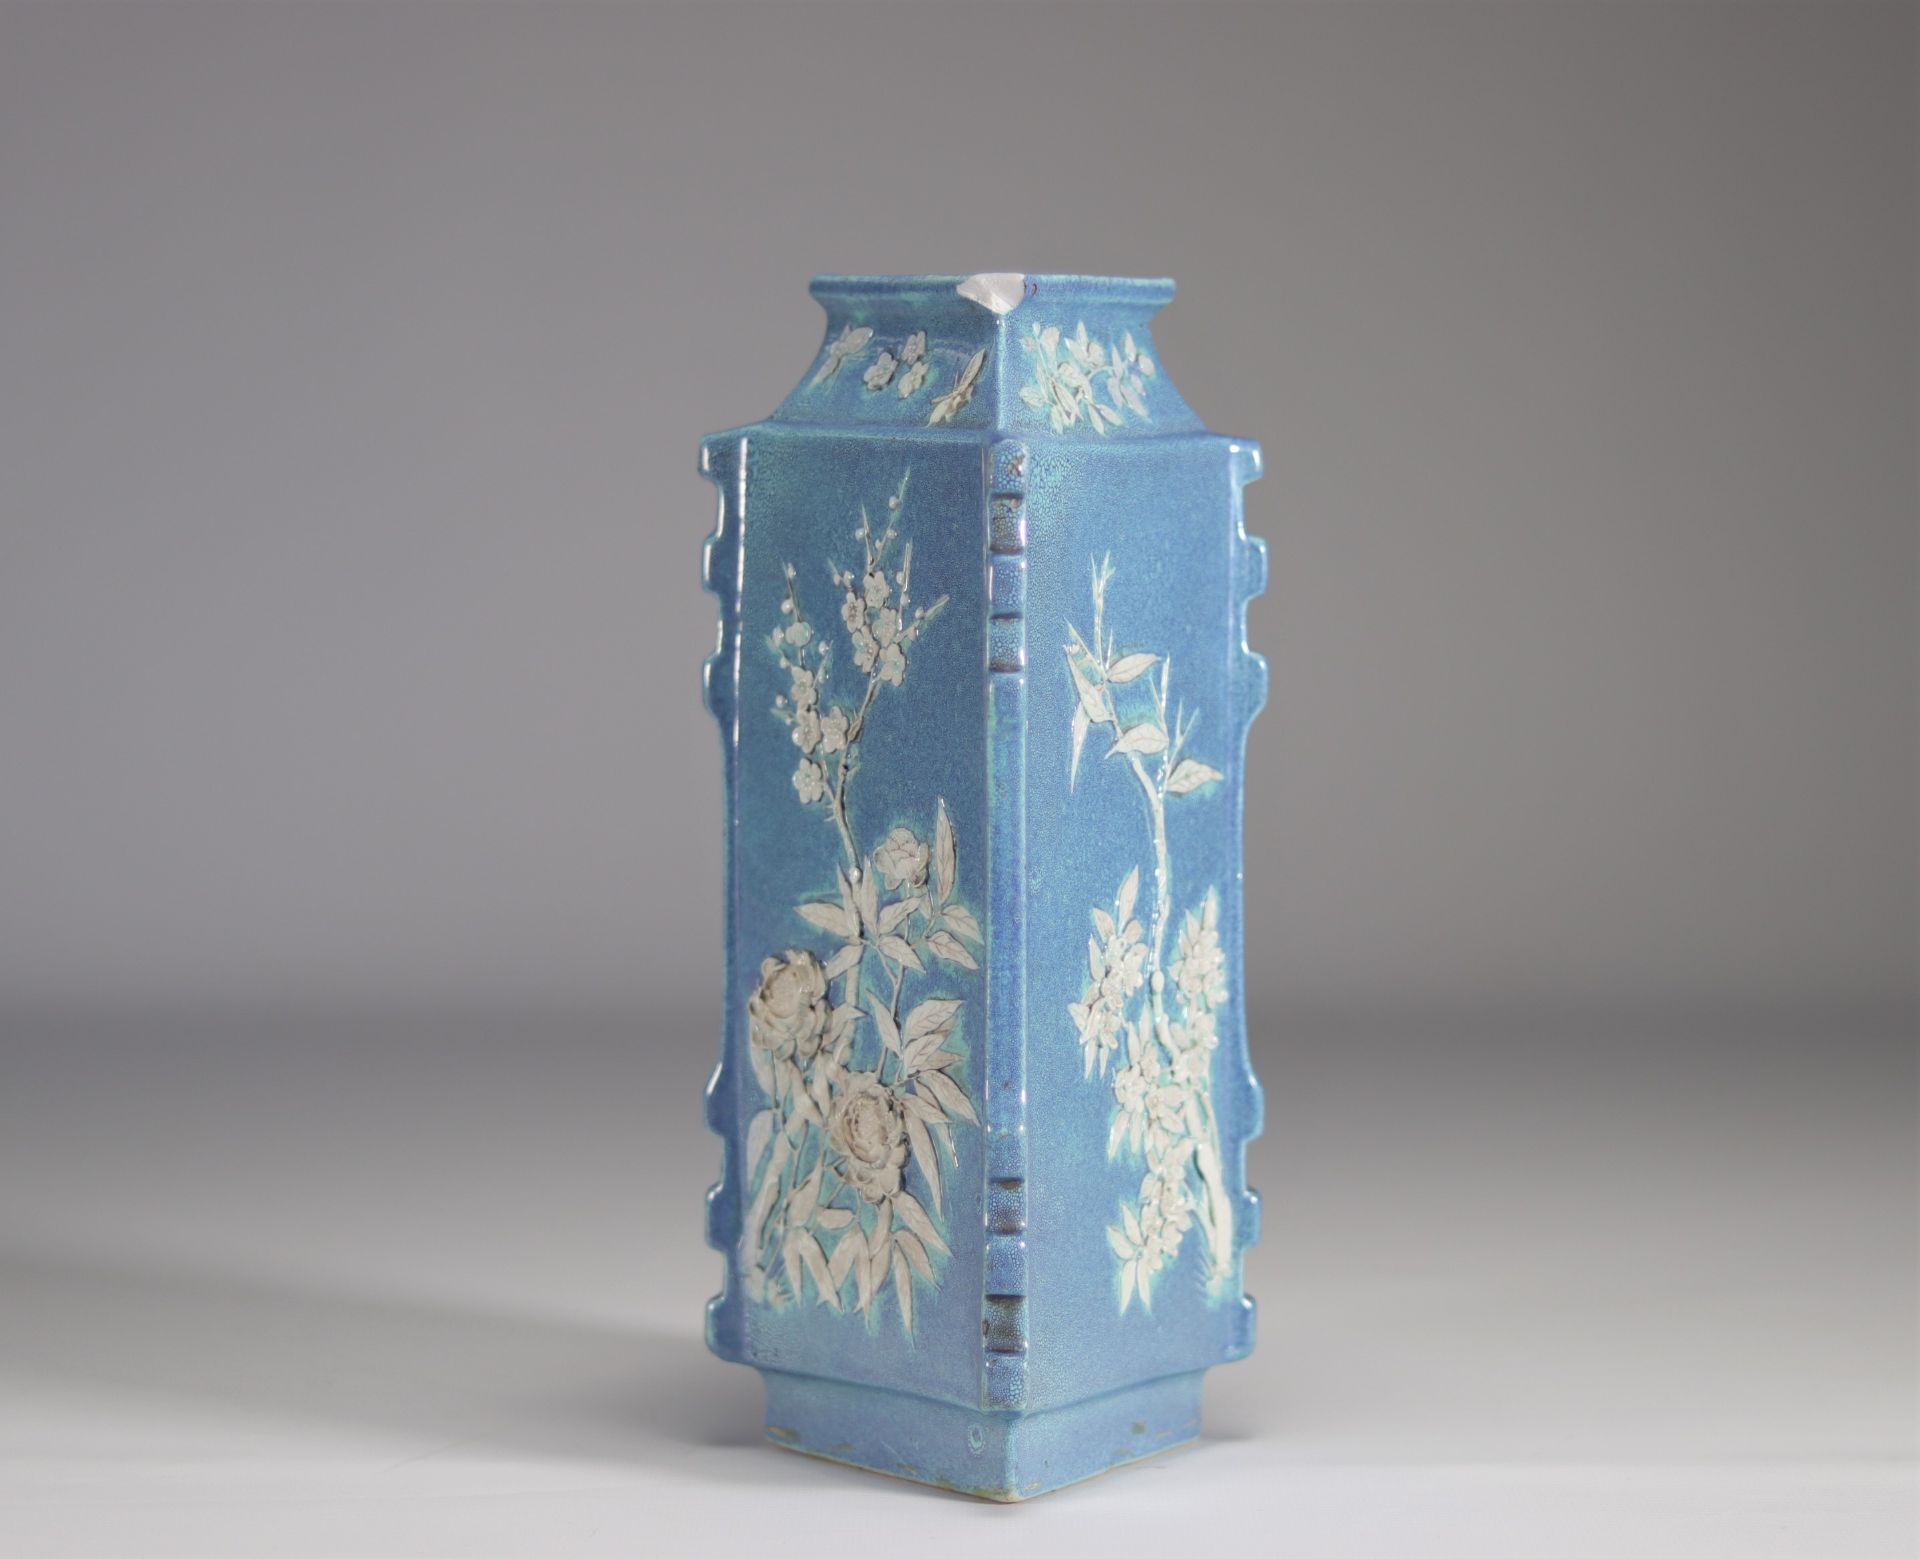 A Chinese porcelain vase decorated with flowers in relief on a light blue background from Qing perio - Image 2 of 5